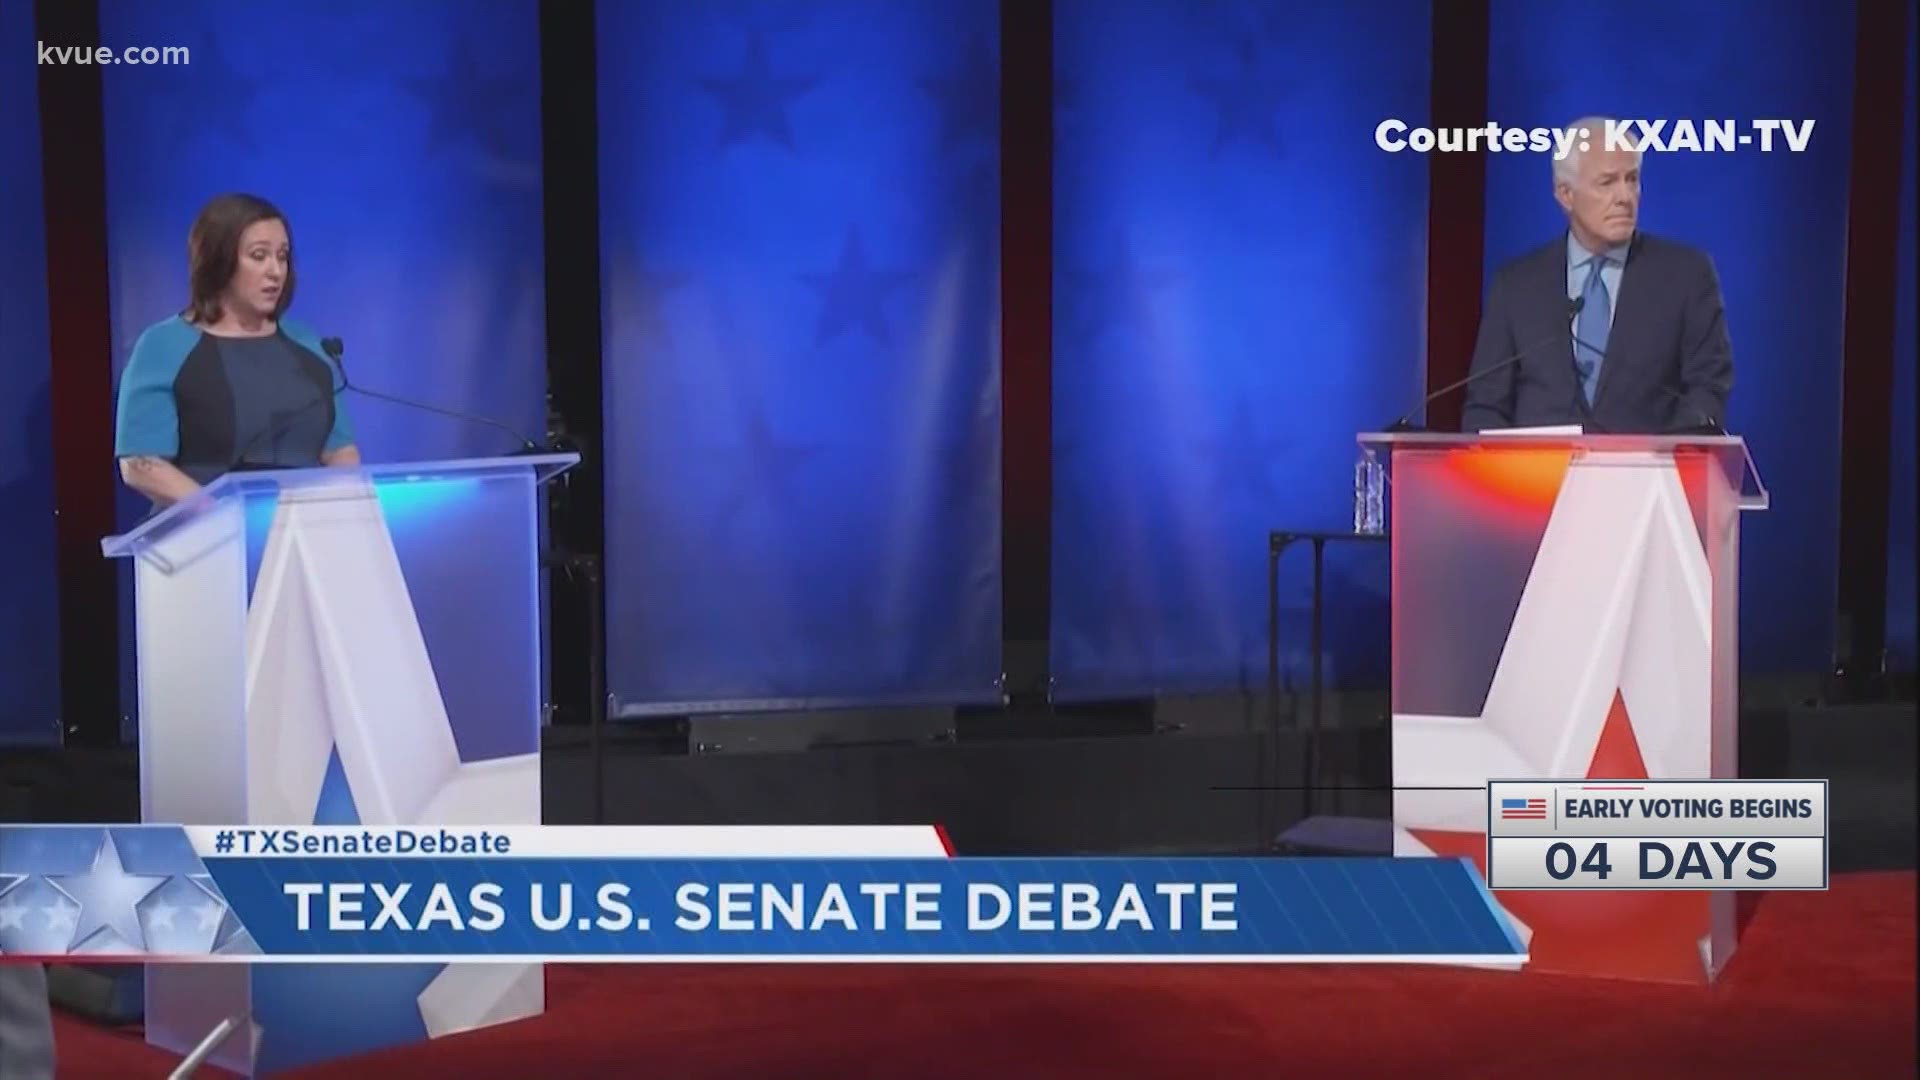 Sen. John Cornyn and MJ Hegar faced off in a U.S. Senate debate on Friday night. They made their cases to Texas voters.